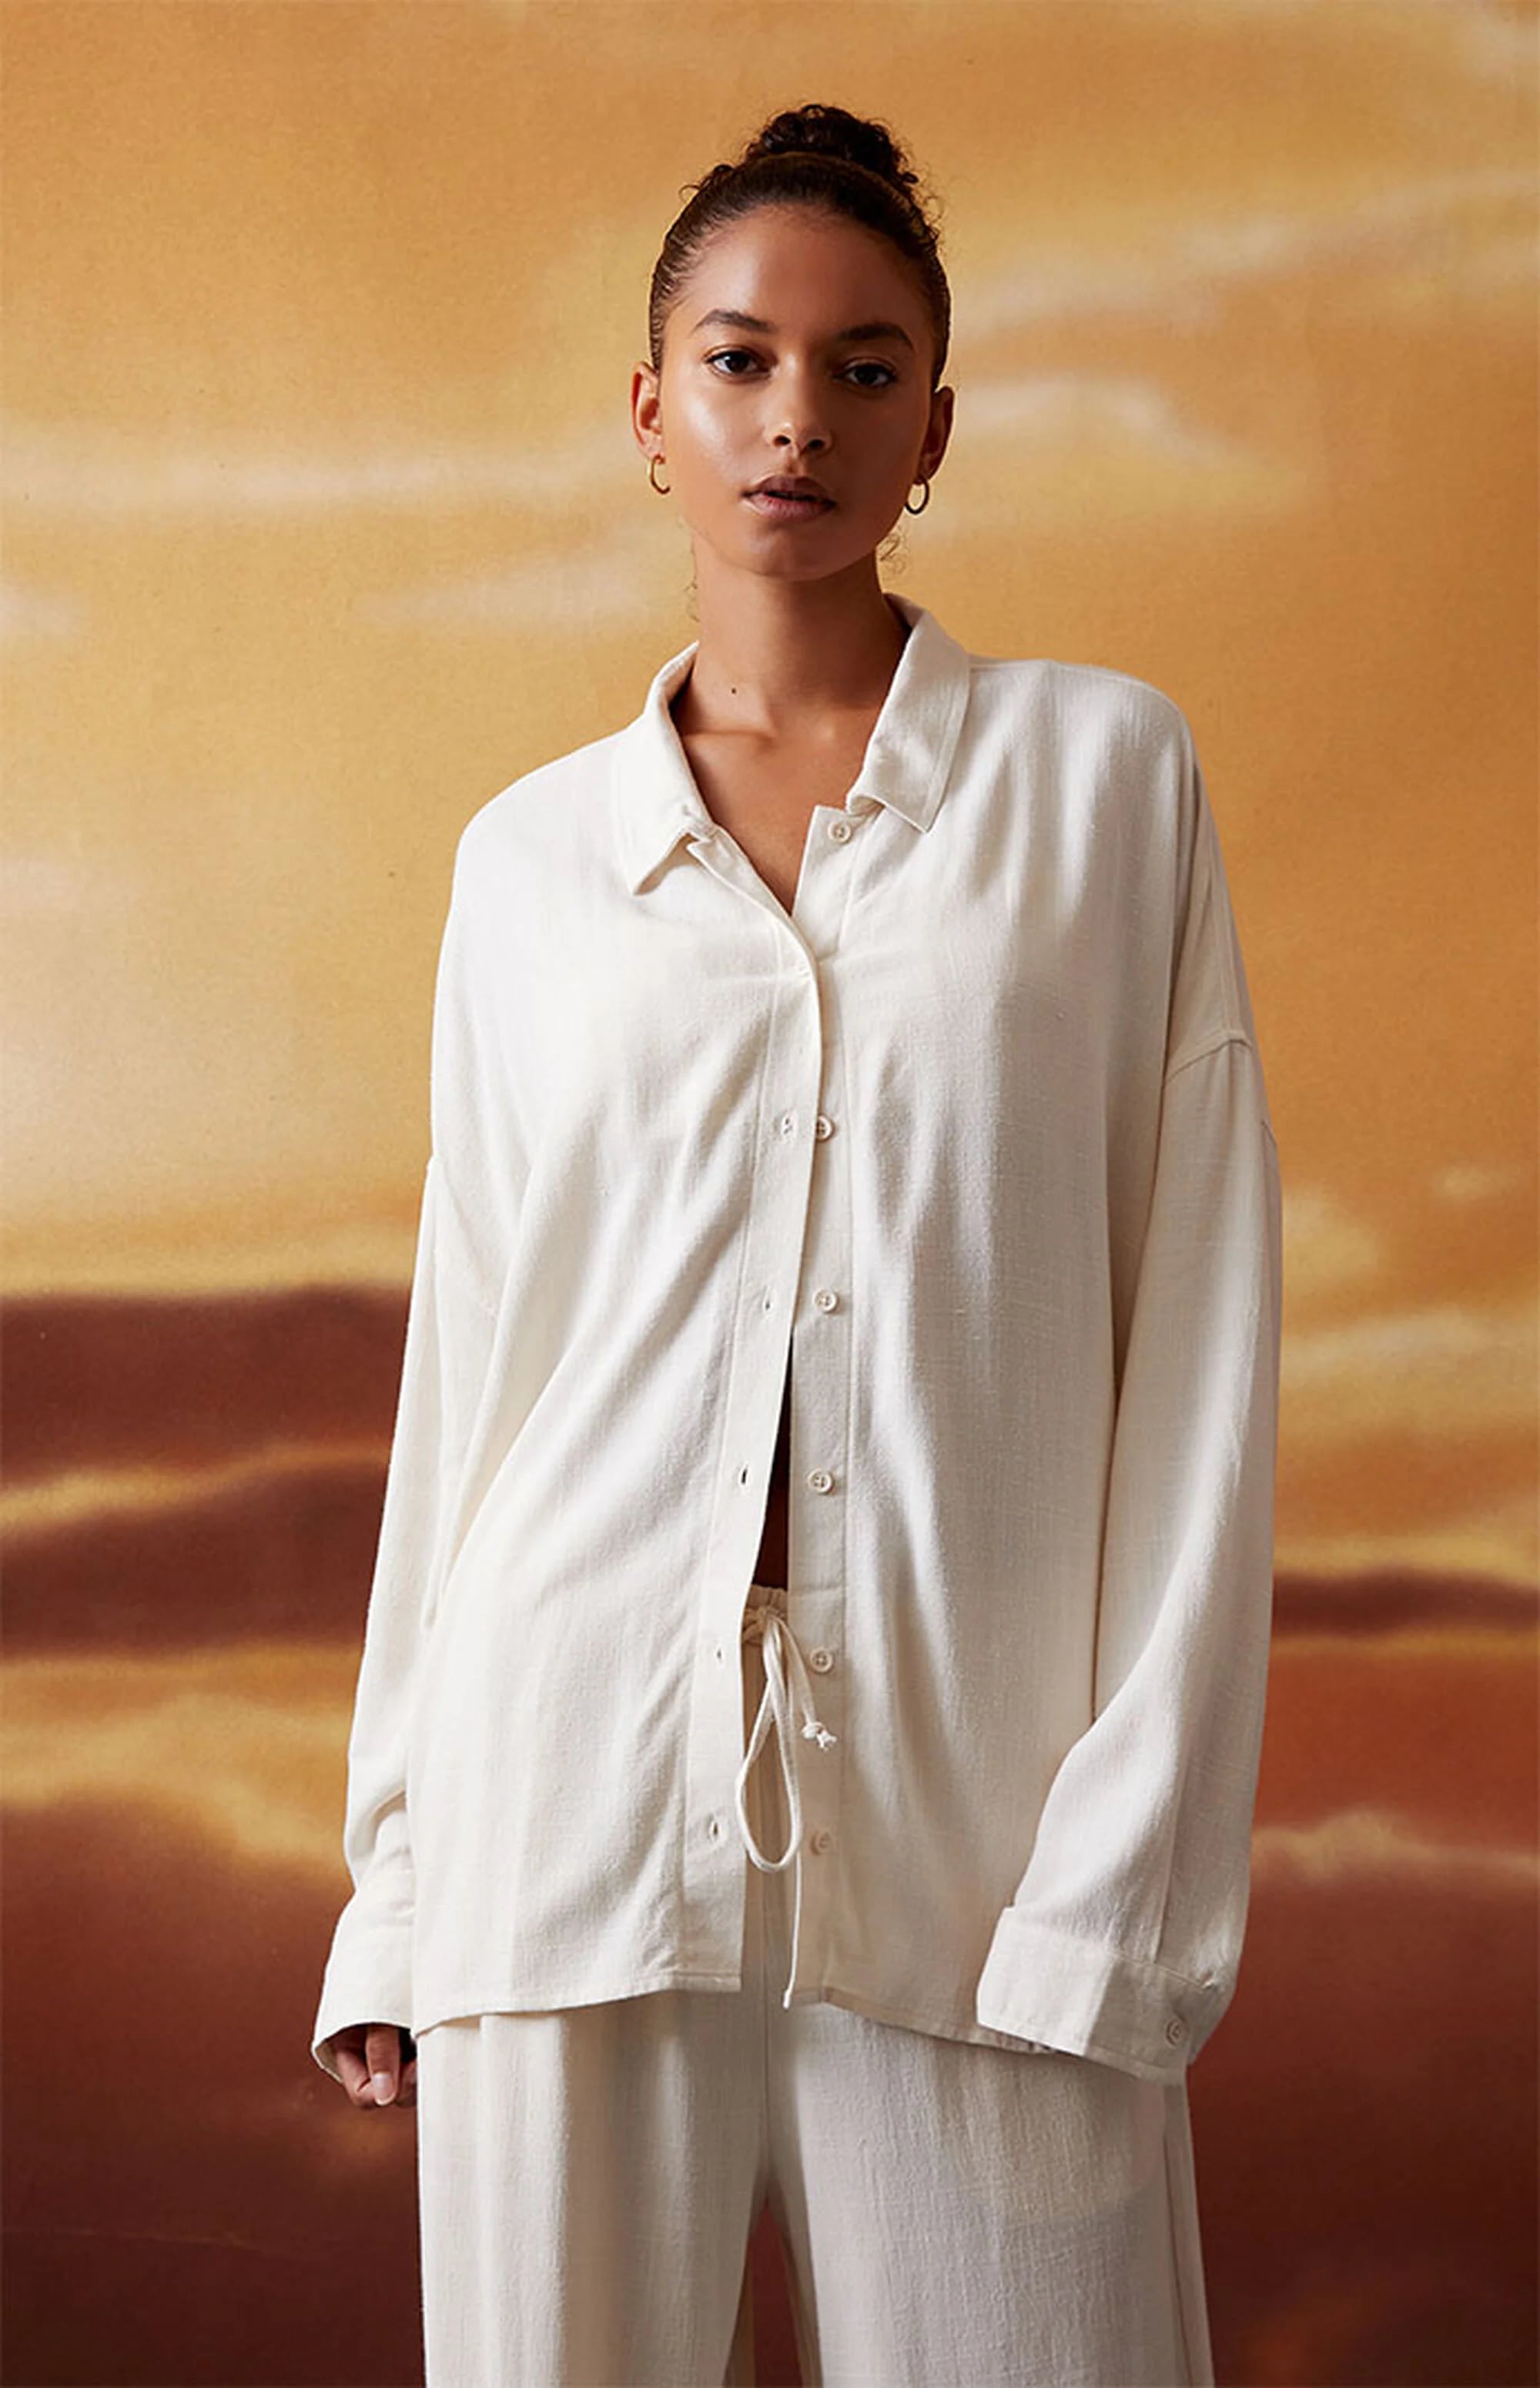 Oversized Dress Shirt Style: Learn How to Master this Trend and Stand ...